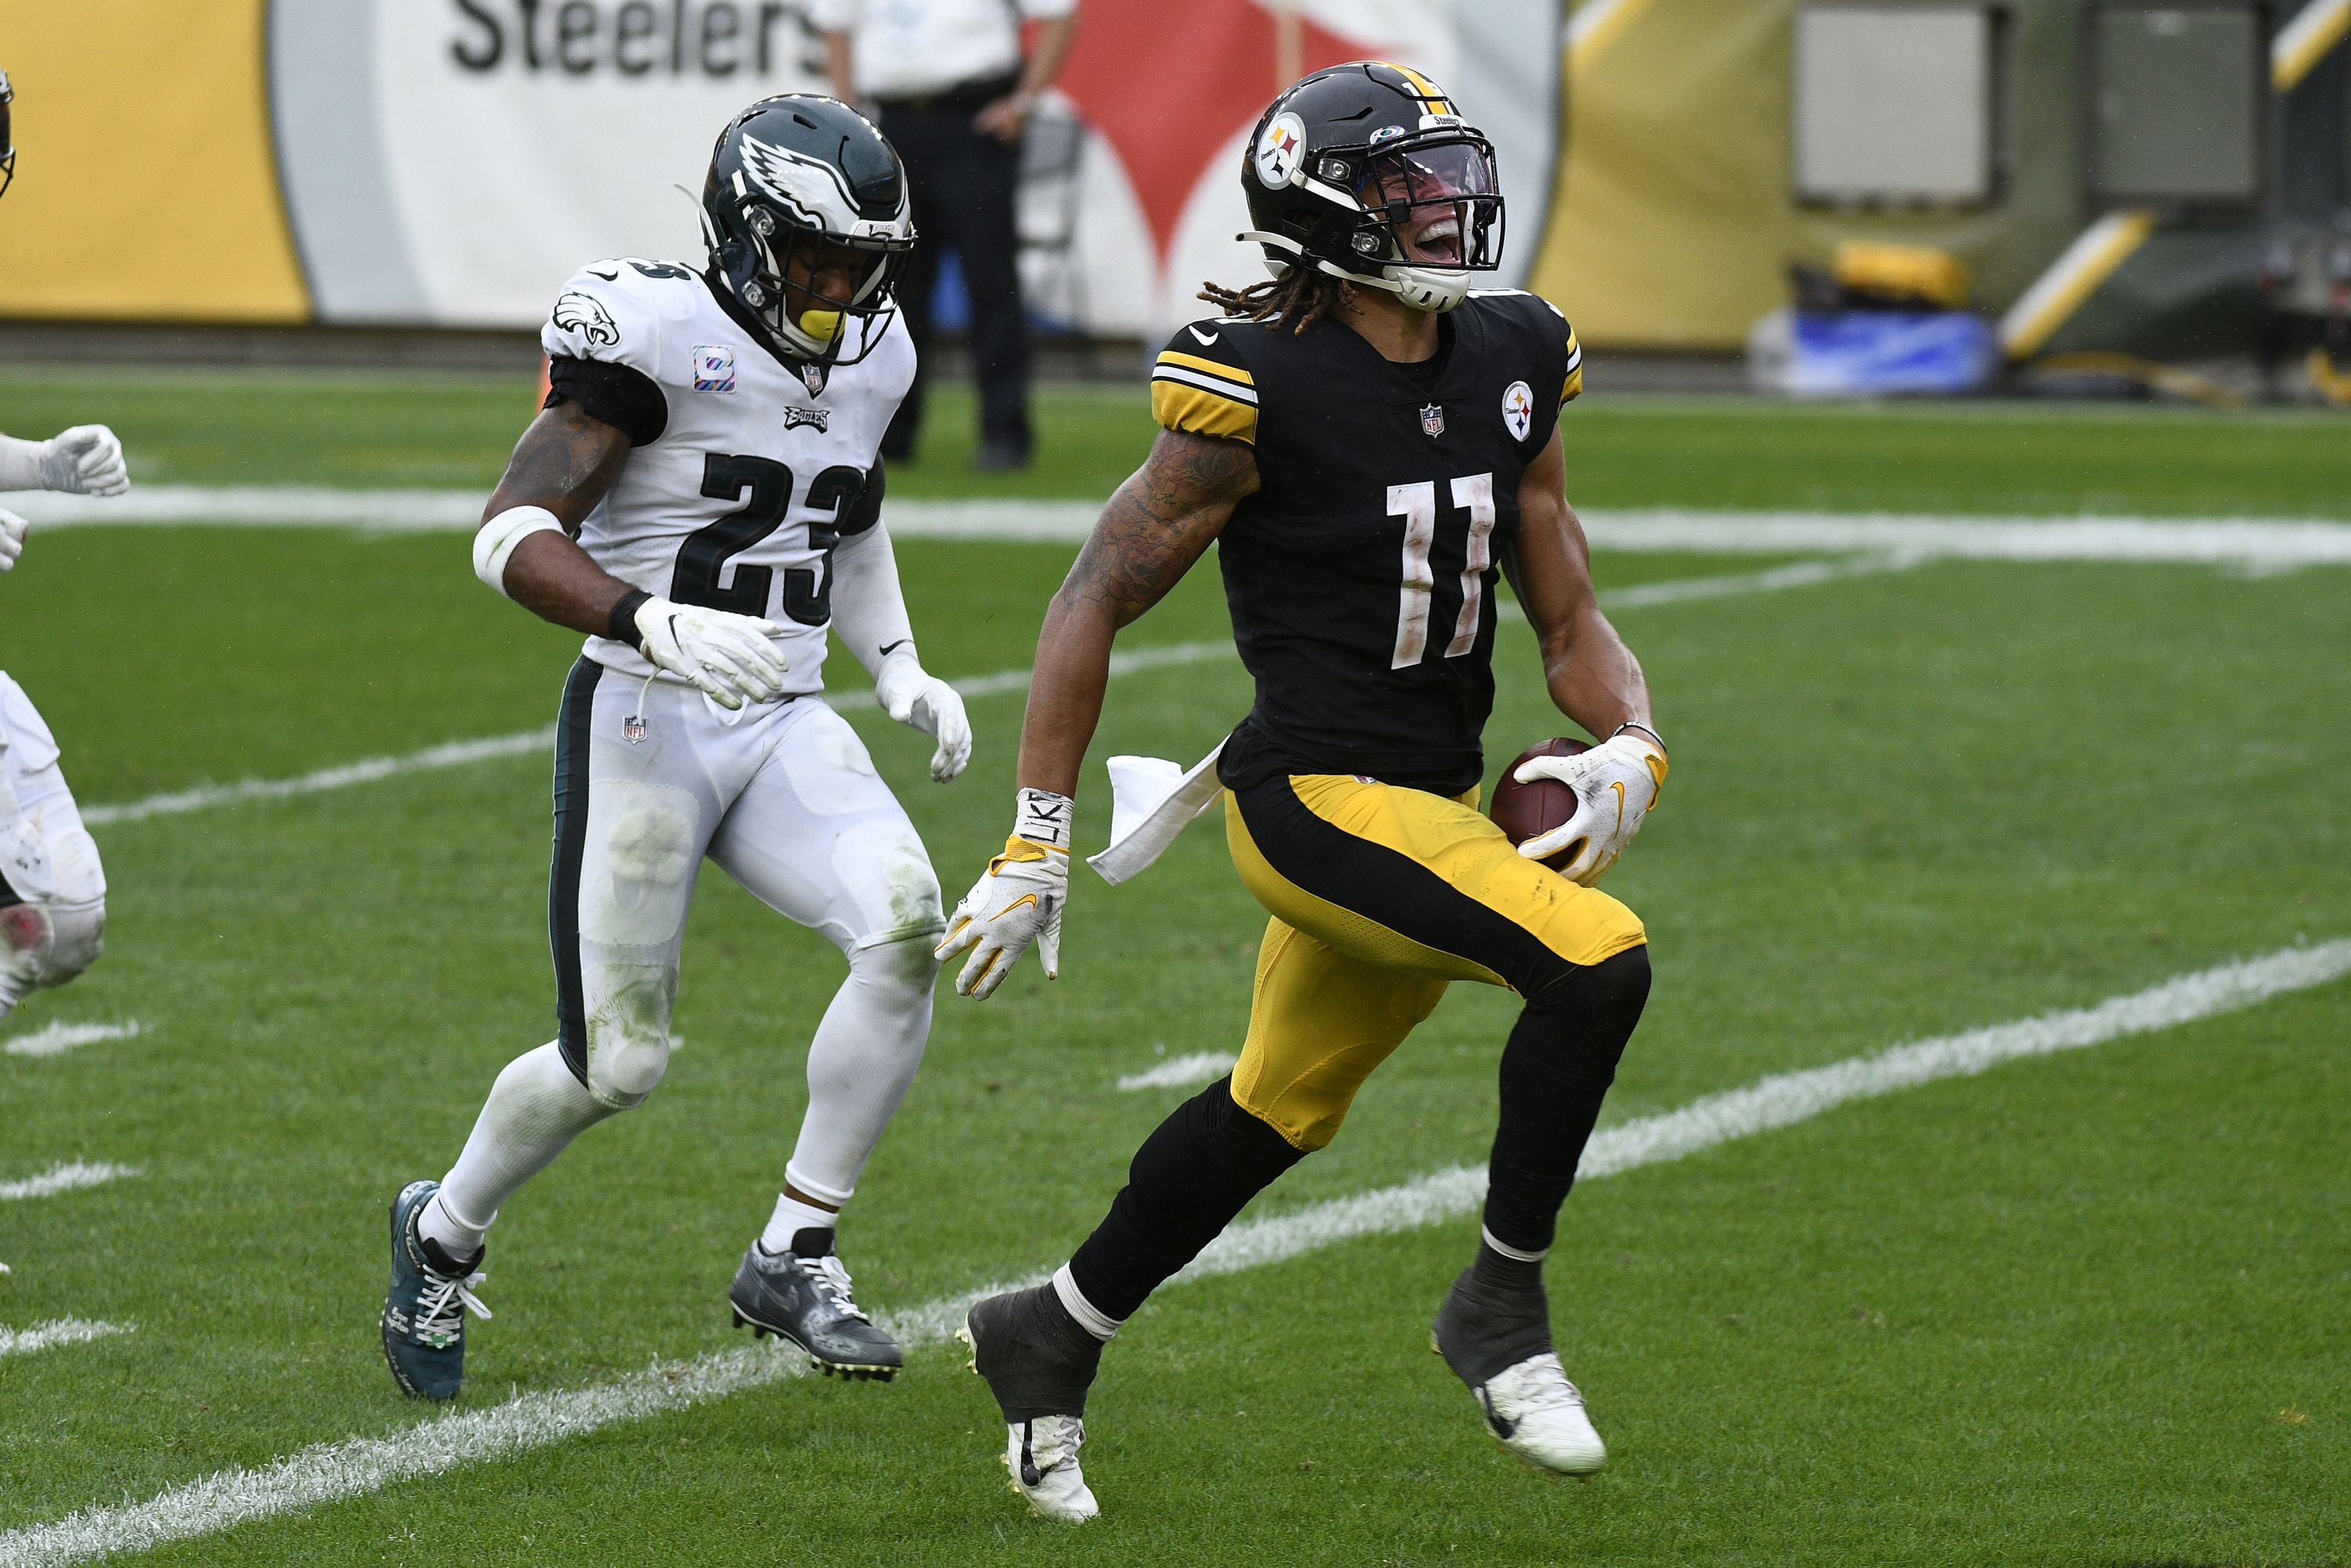 How Steelers rookie Chase Claypool scored 4 TDs, including the